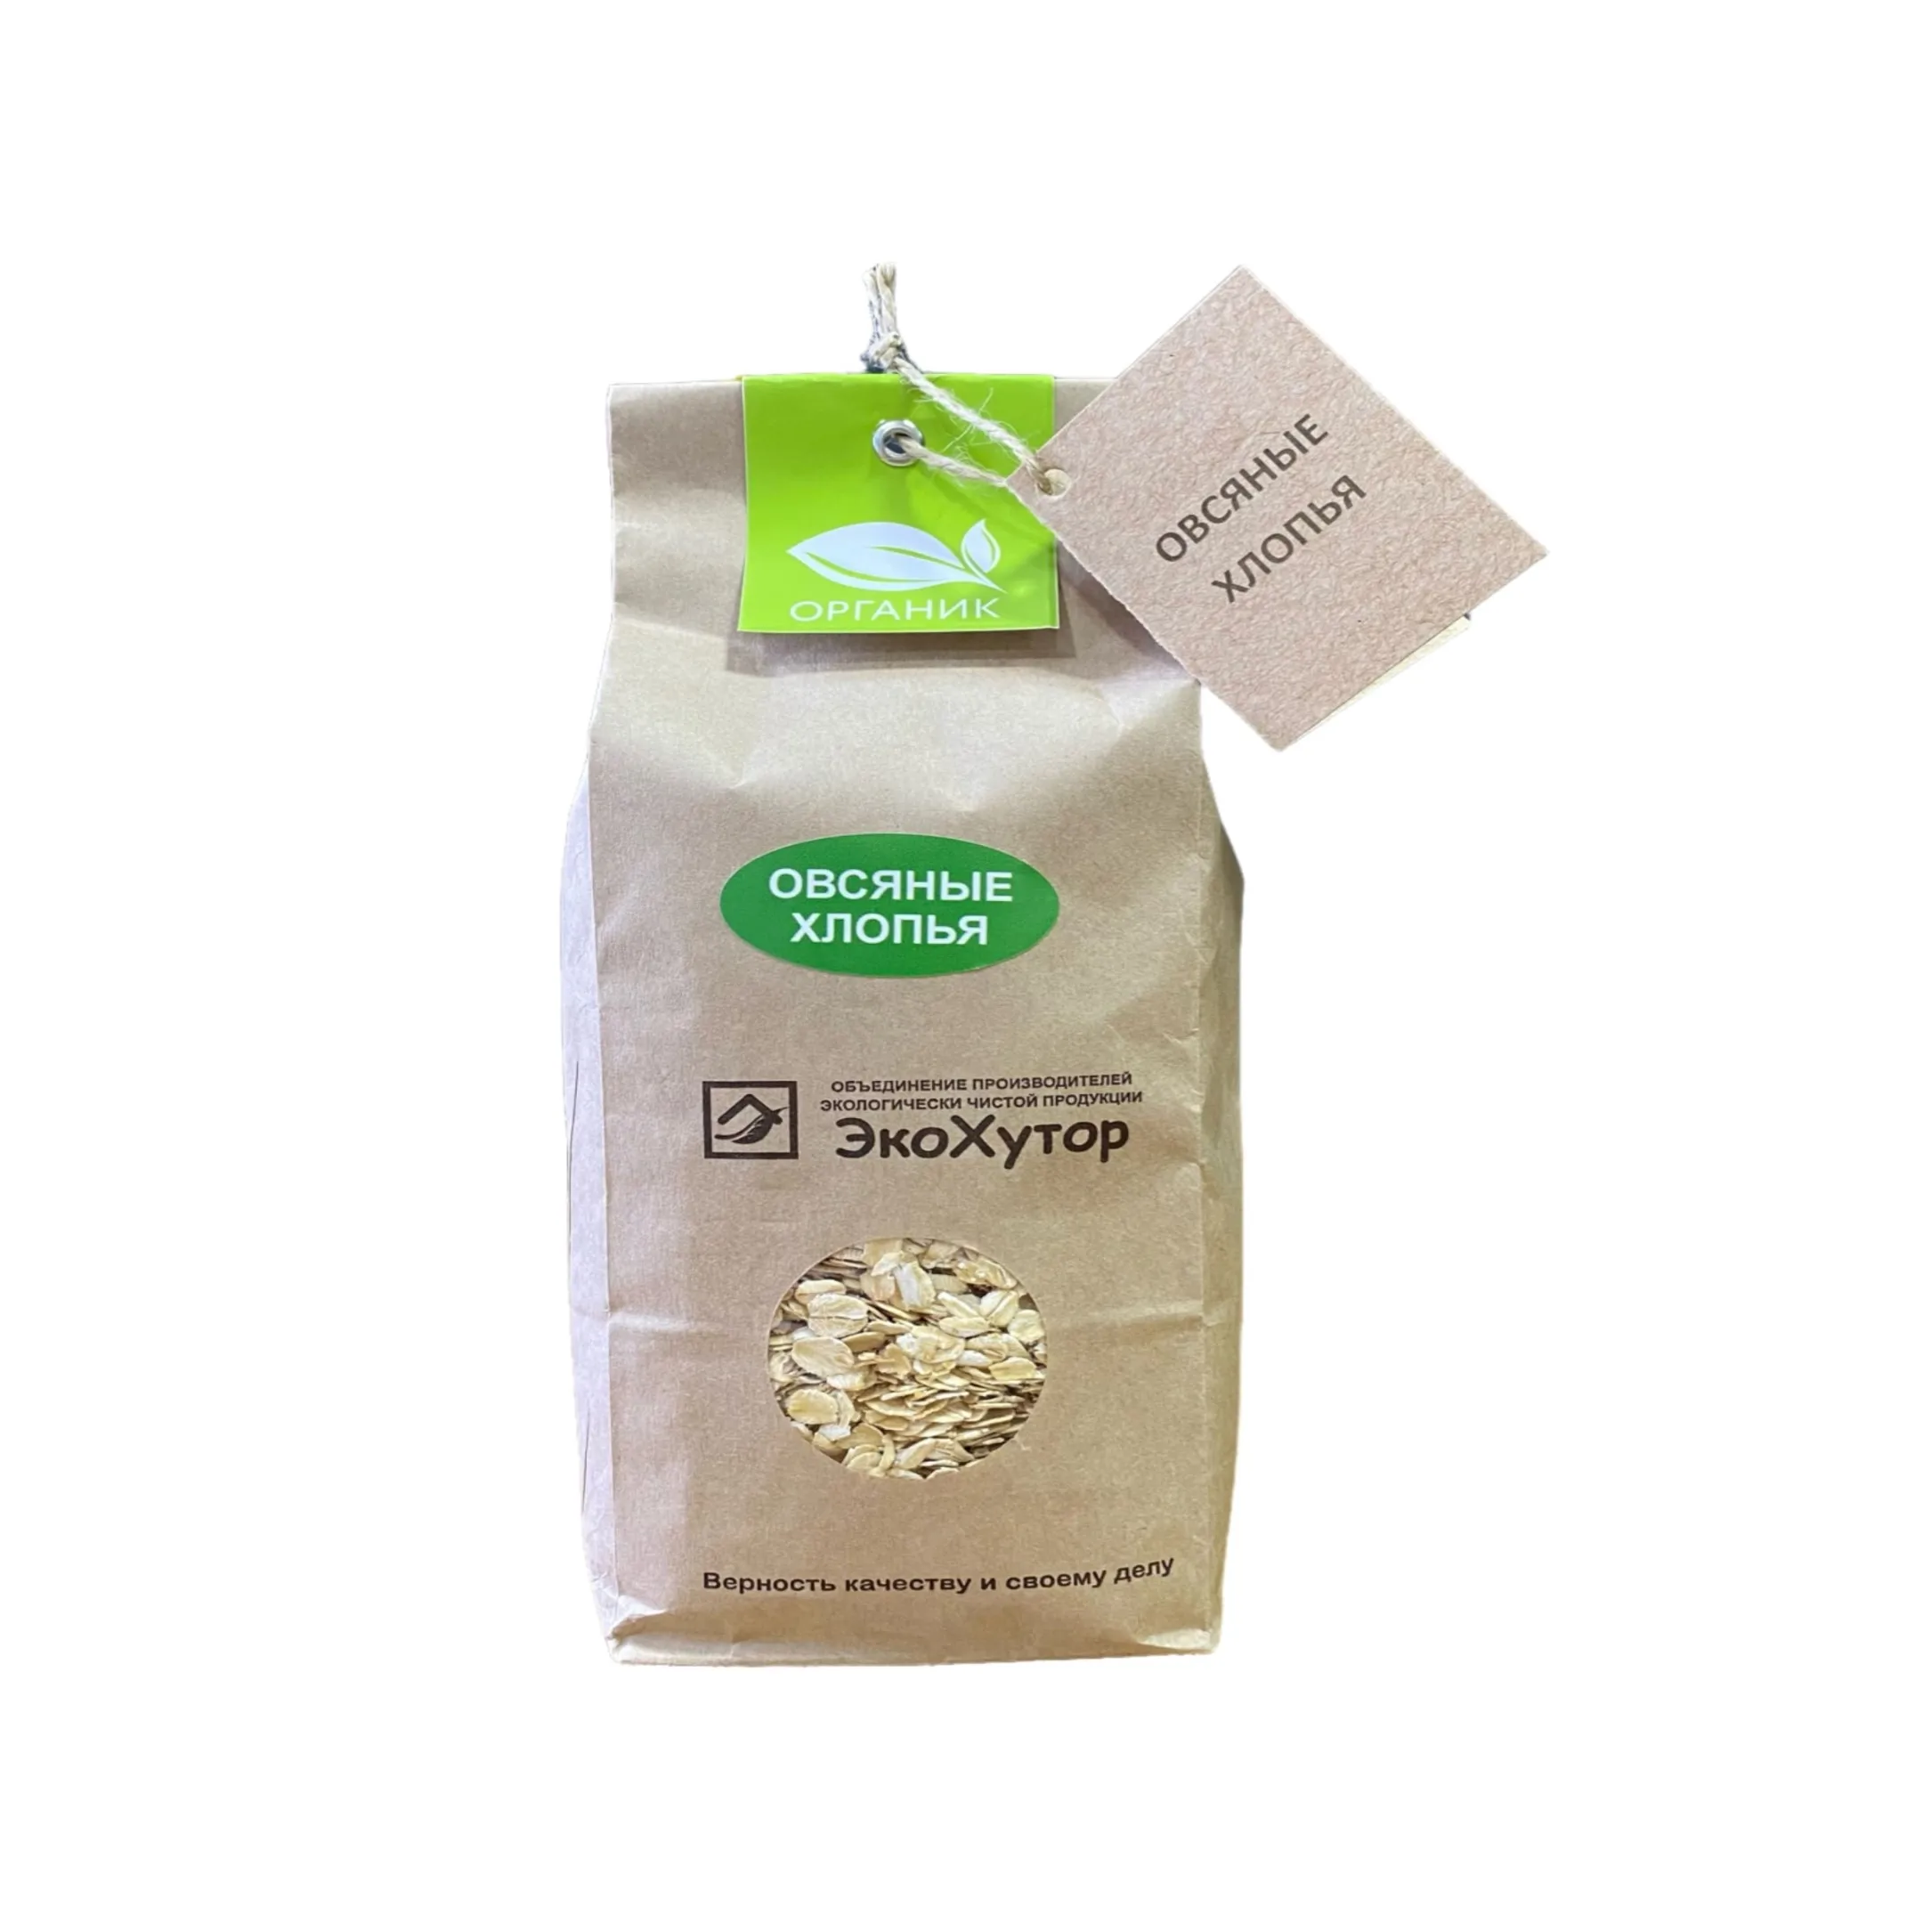 High quality organic oat flakes 100% natural flakes in a package for breakfast cereals unique technology